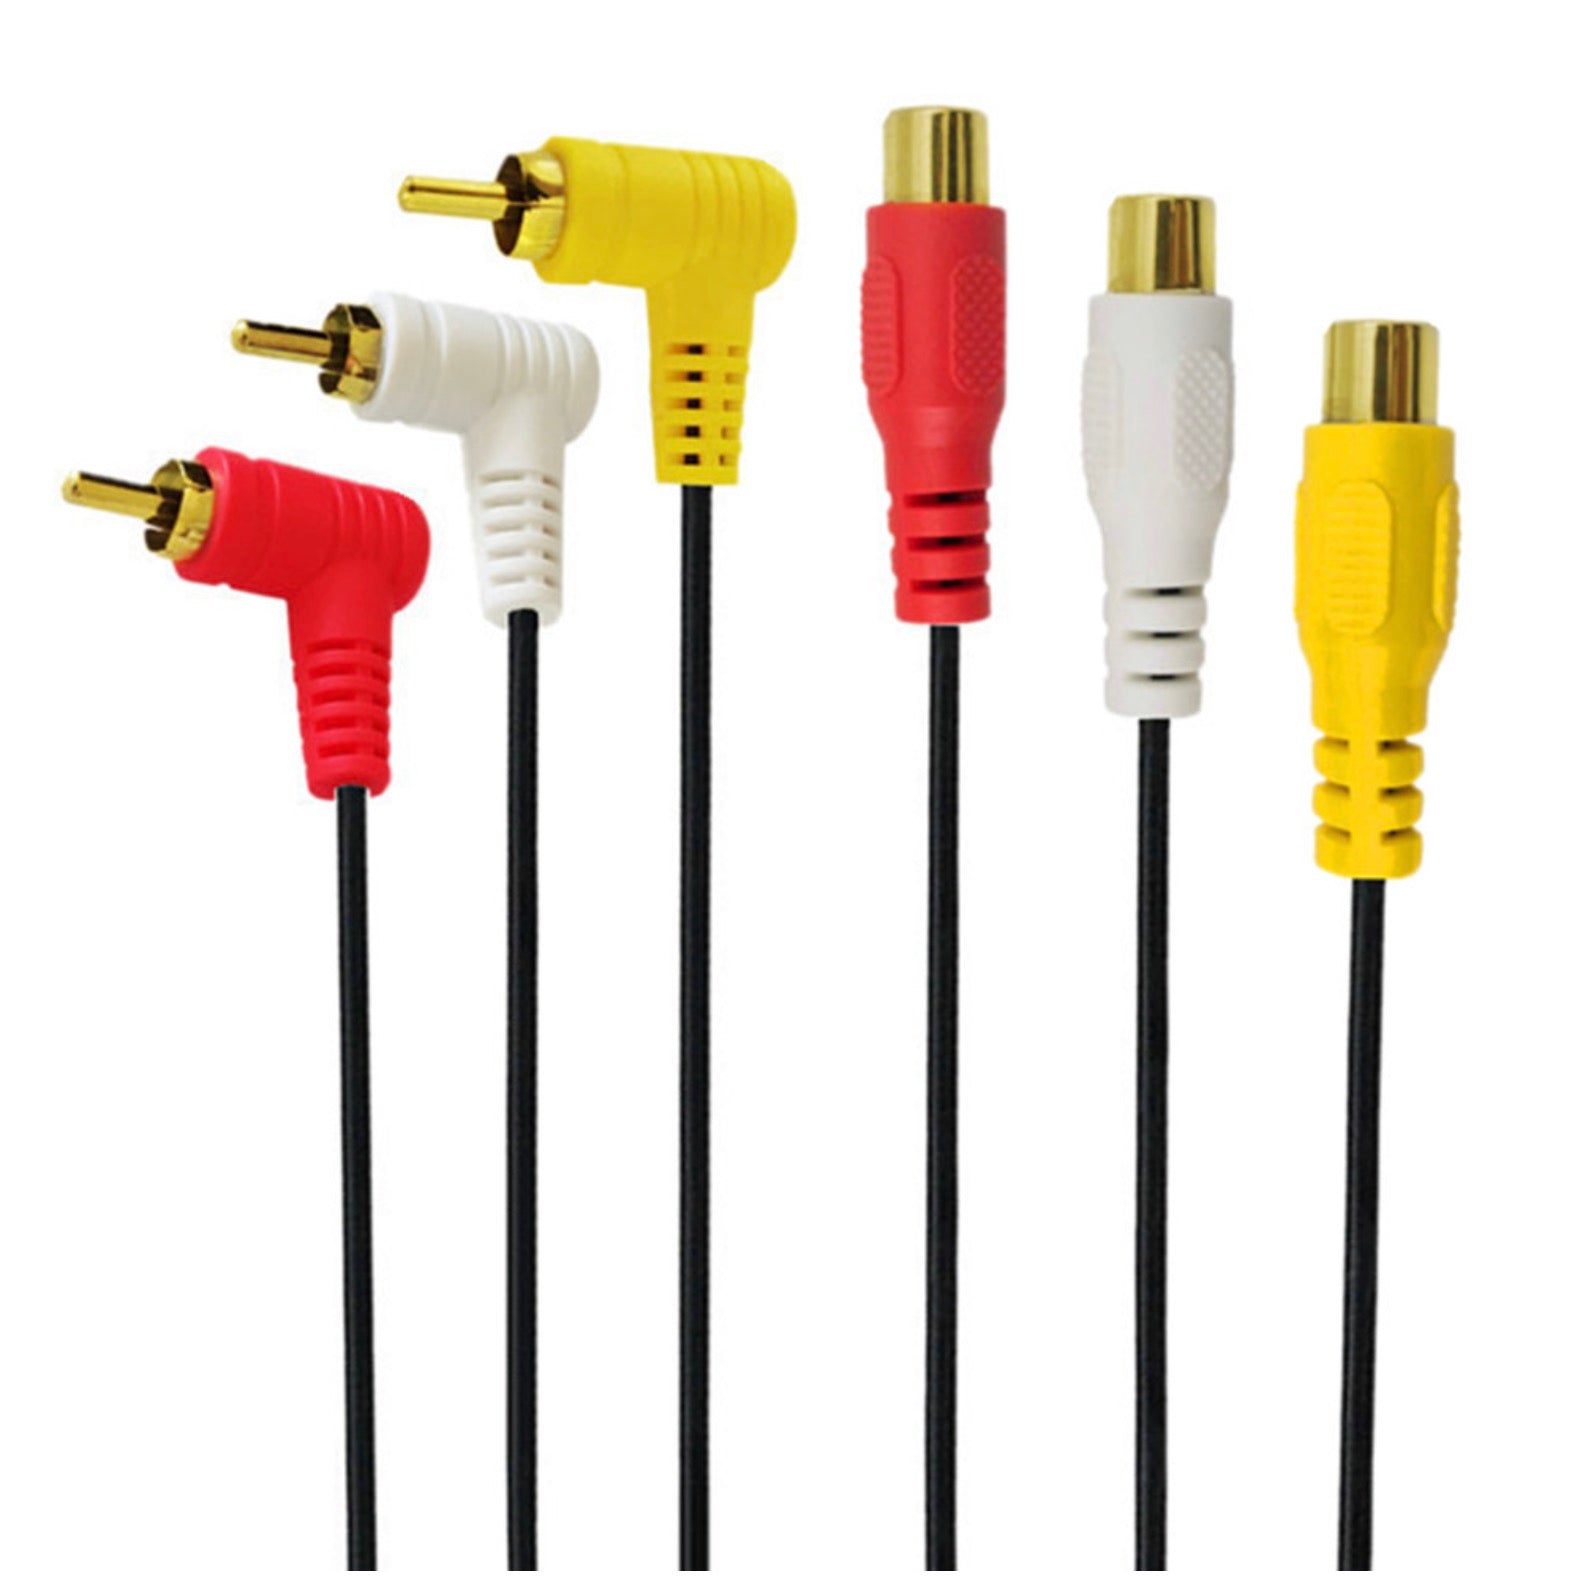 3 RCA Male to 3 RCA Female Audio Video Composite Extension Cable 1.5m